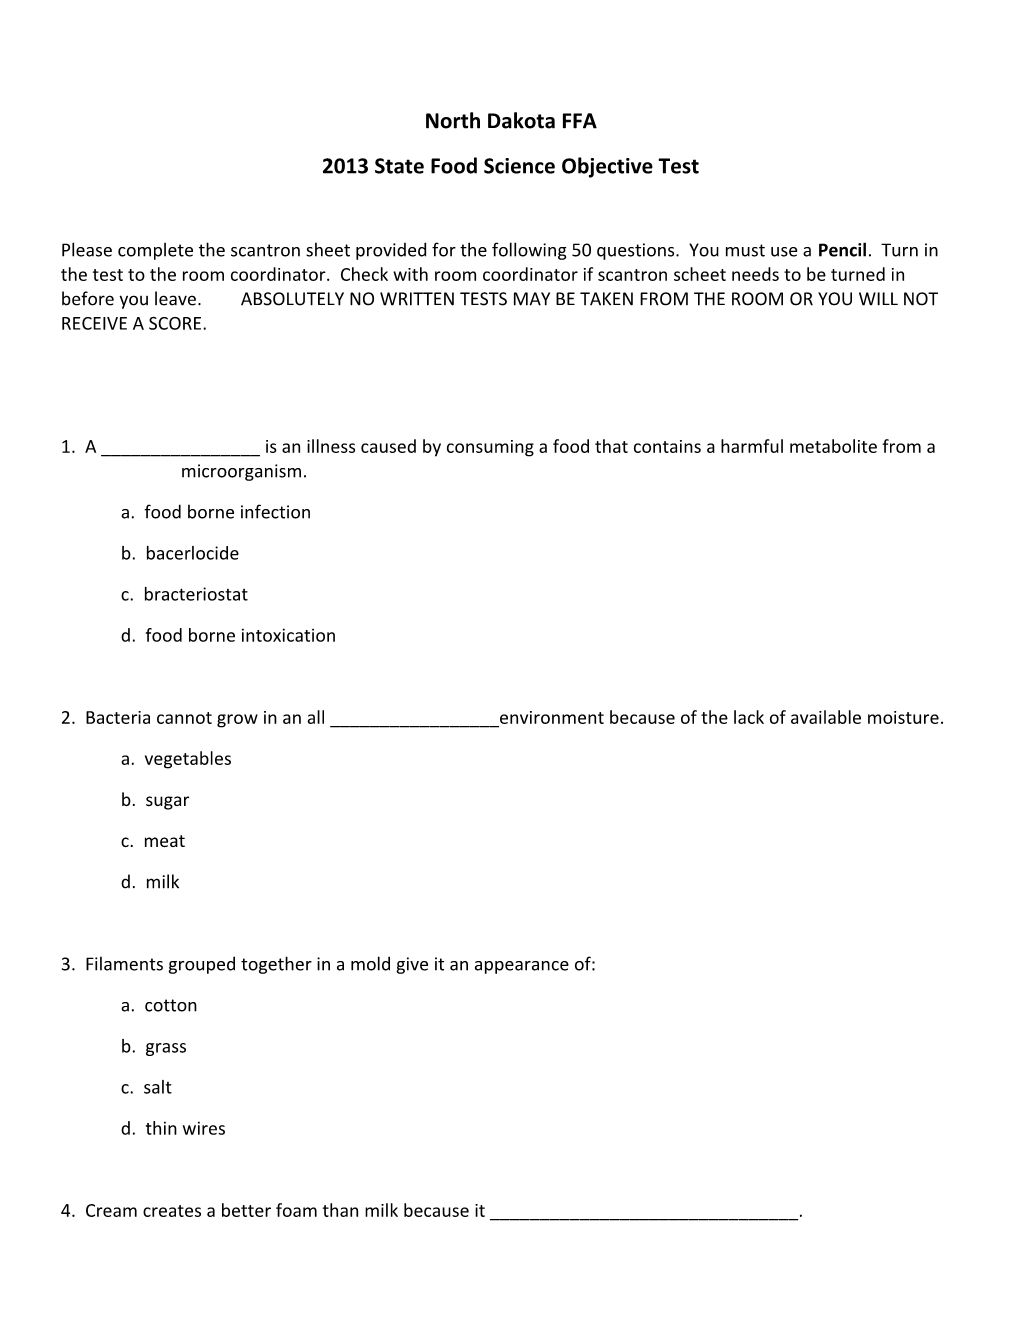 2013 State Food Science Objective Test